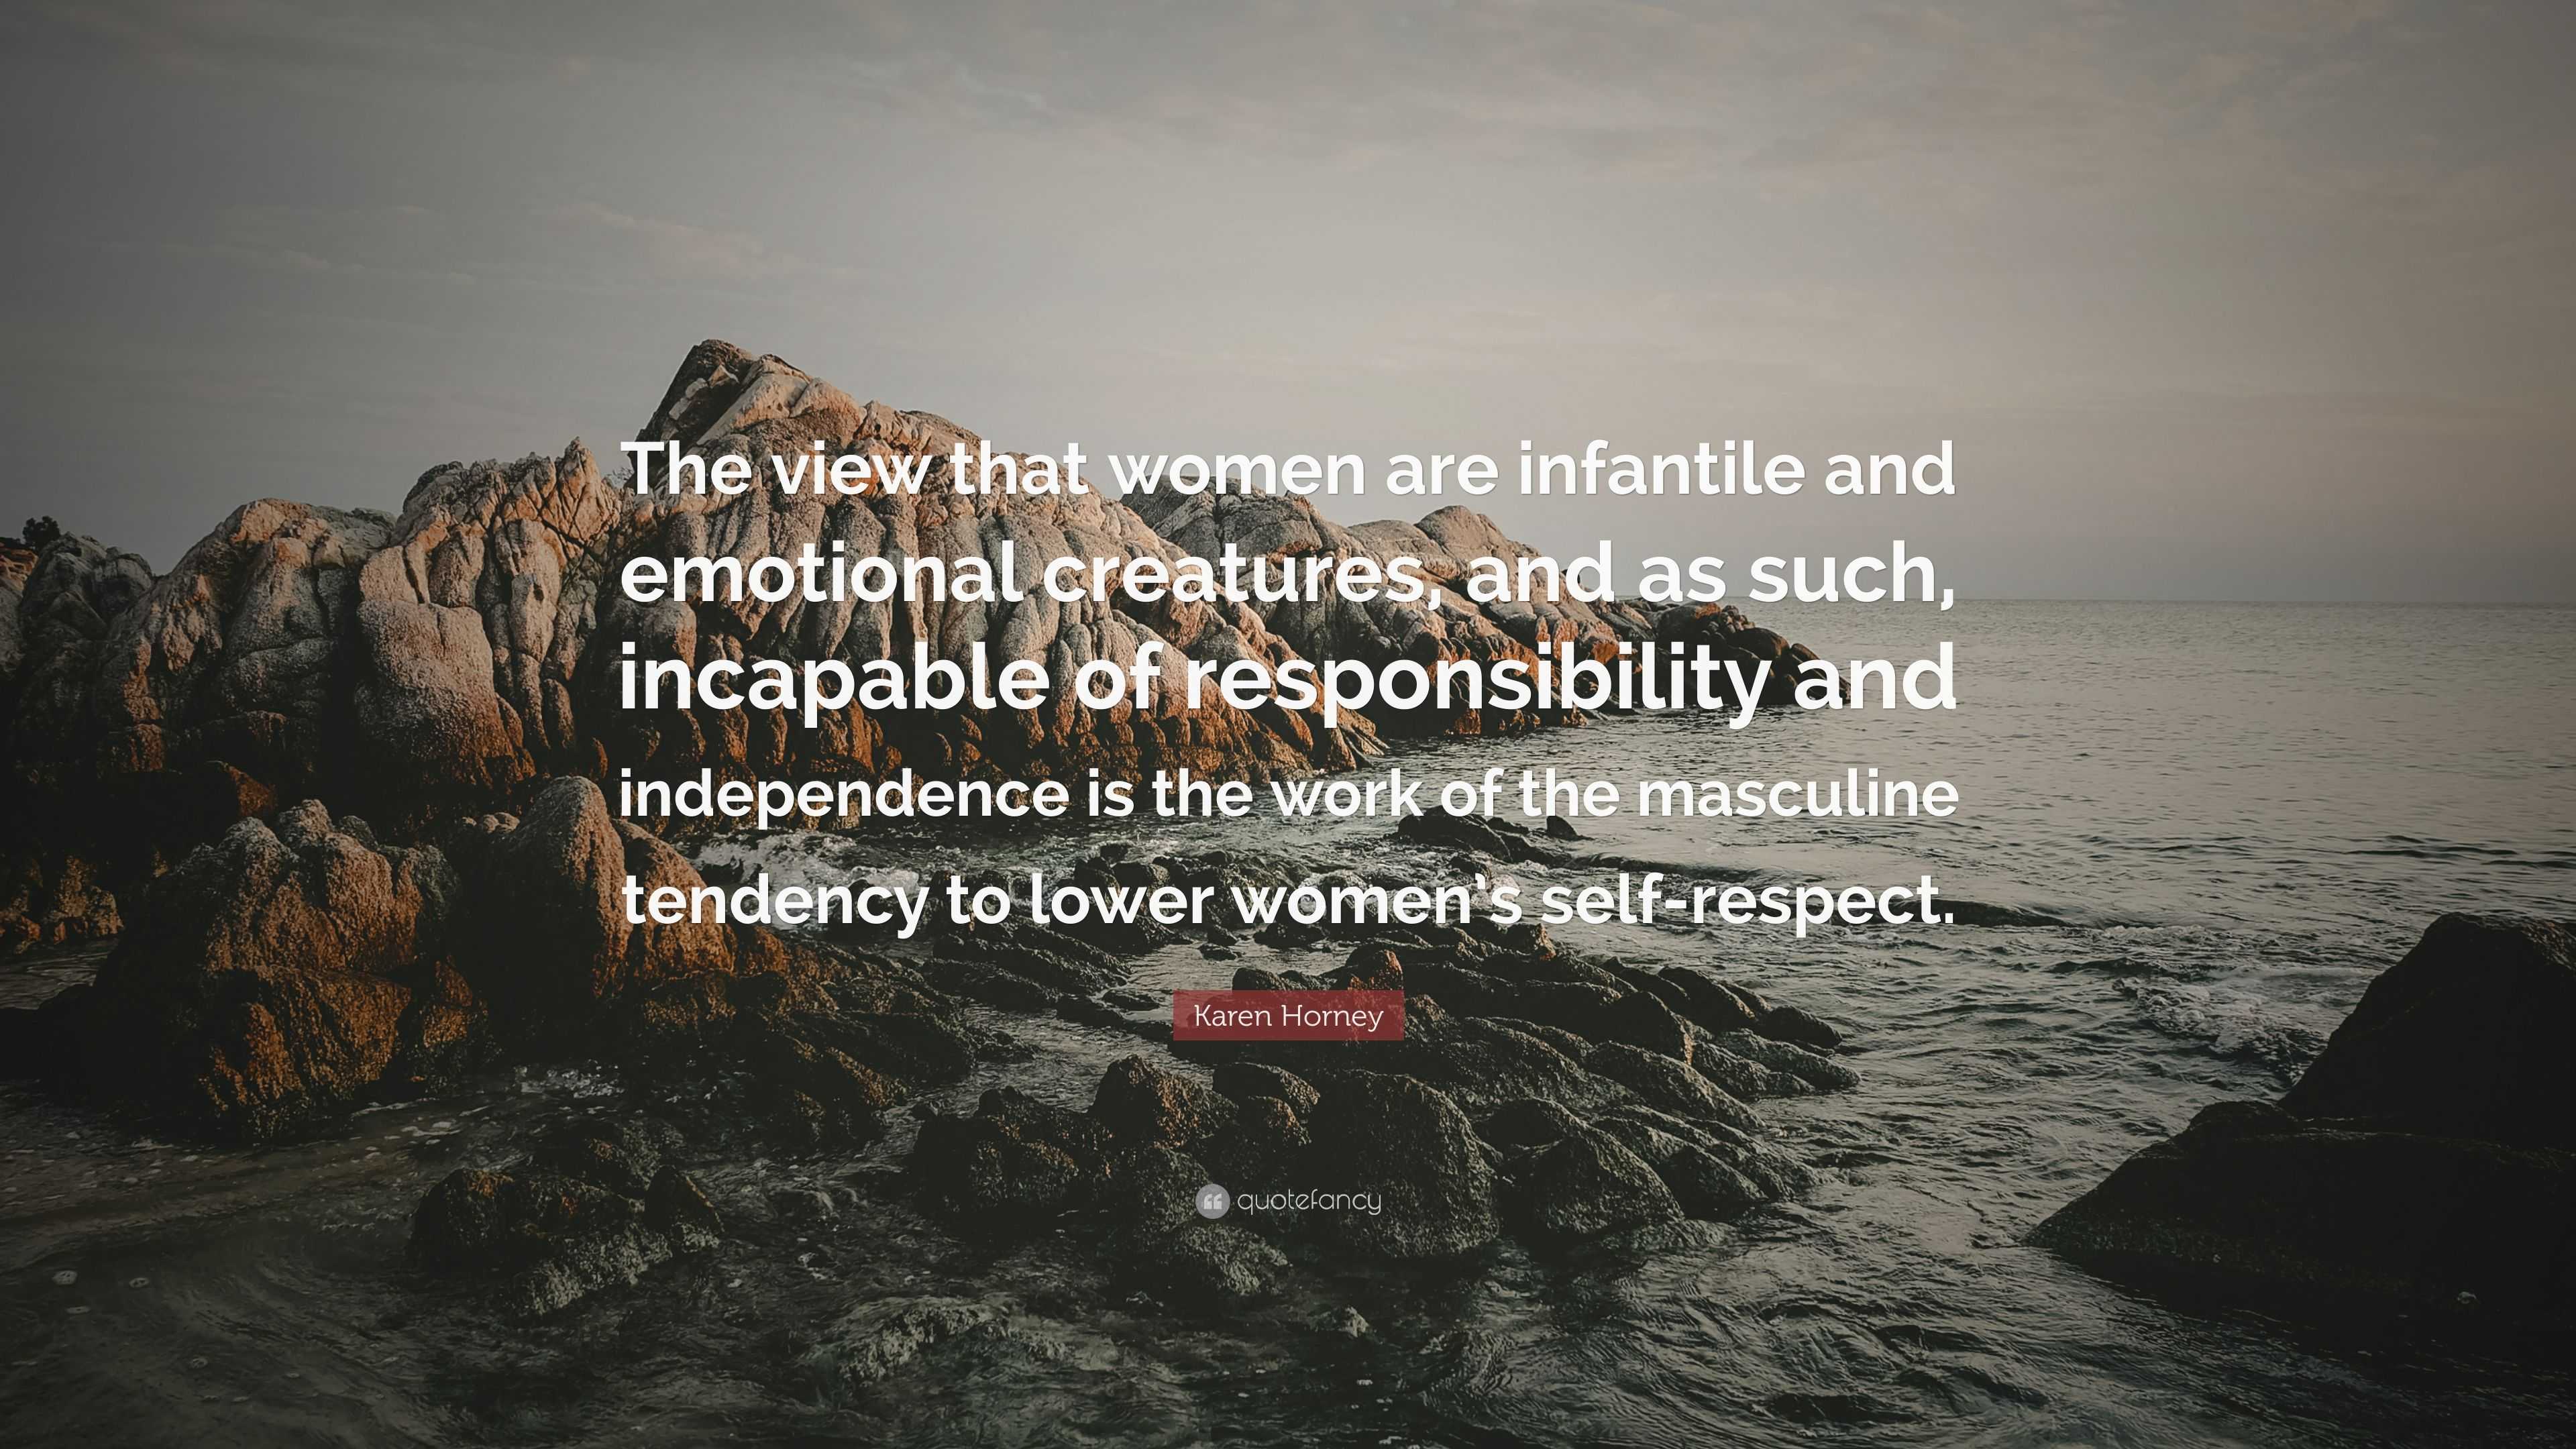 Karen Horney Quote: "The view that women are infantile and ...